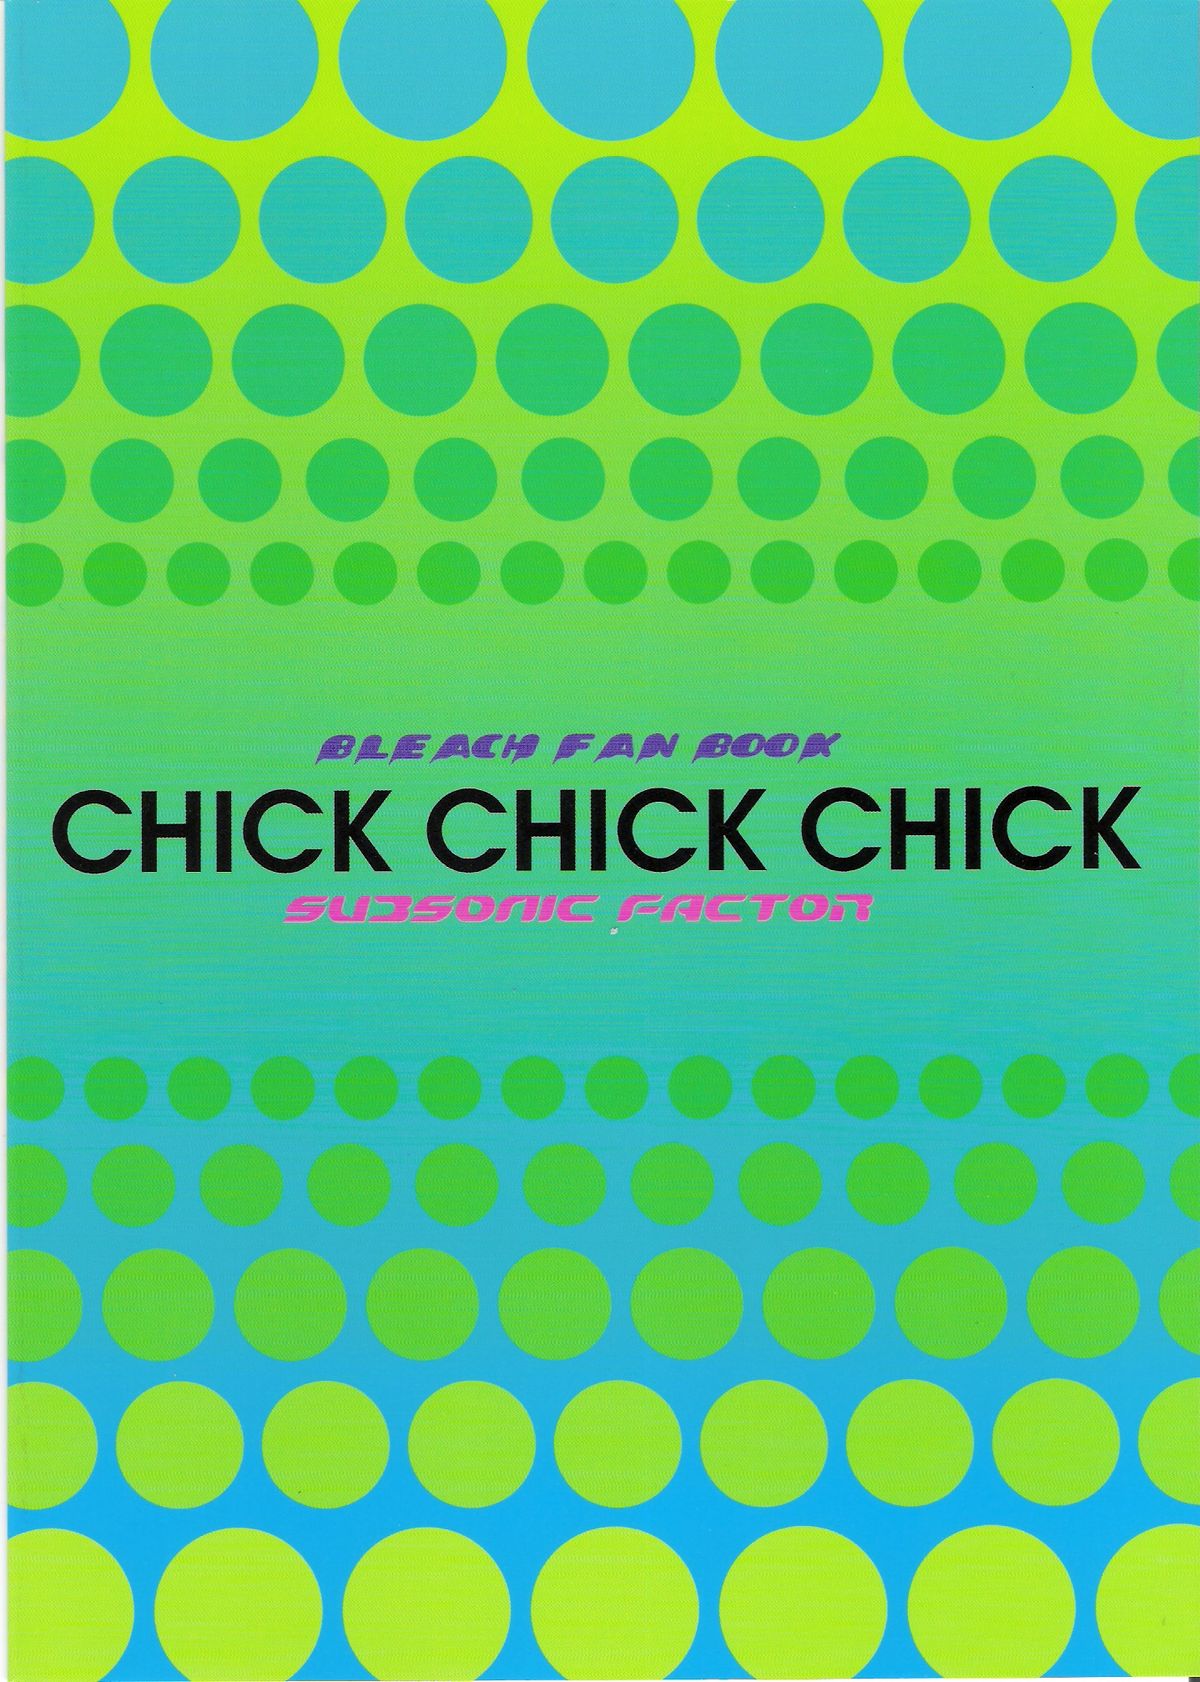 (C74) [SUBSONIC FACTOR (立嶋りあ)] CHICK CHICK CHICK (ブリーチ)